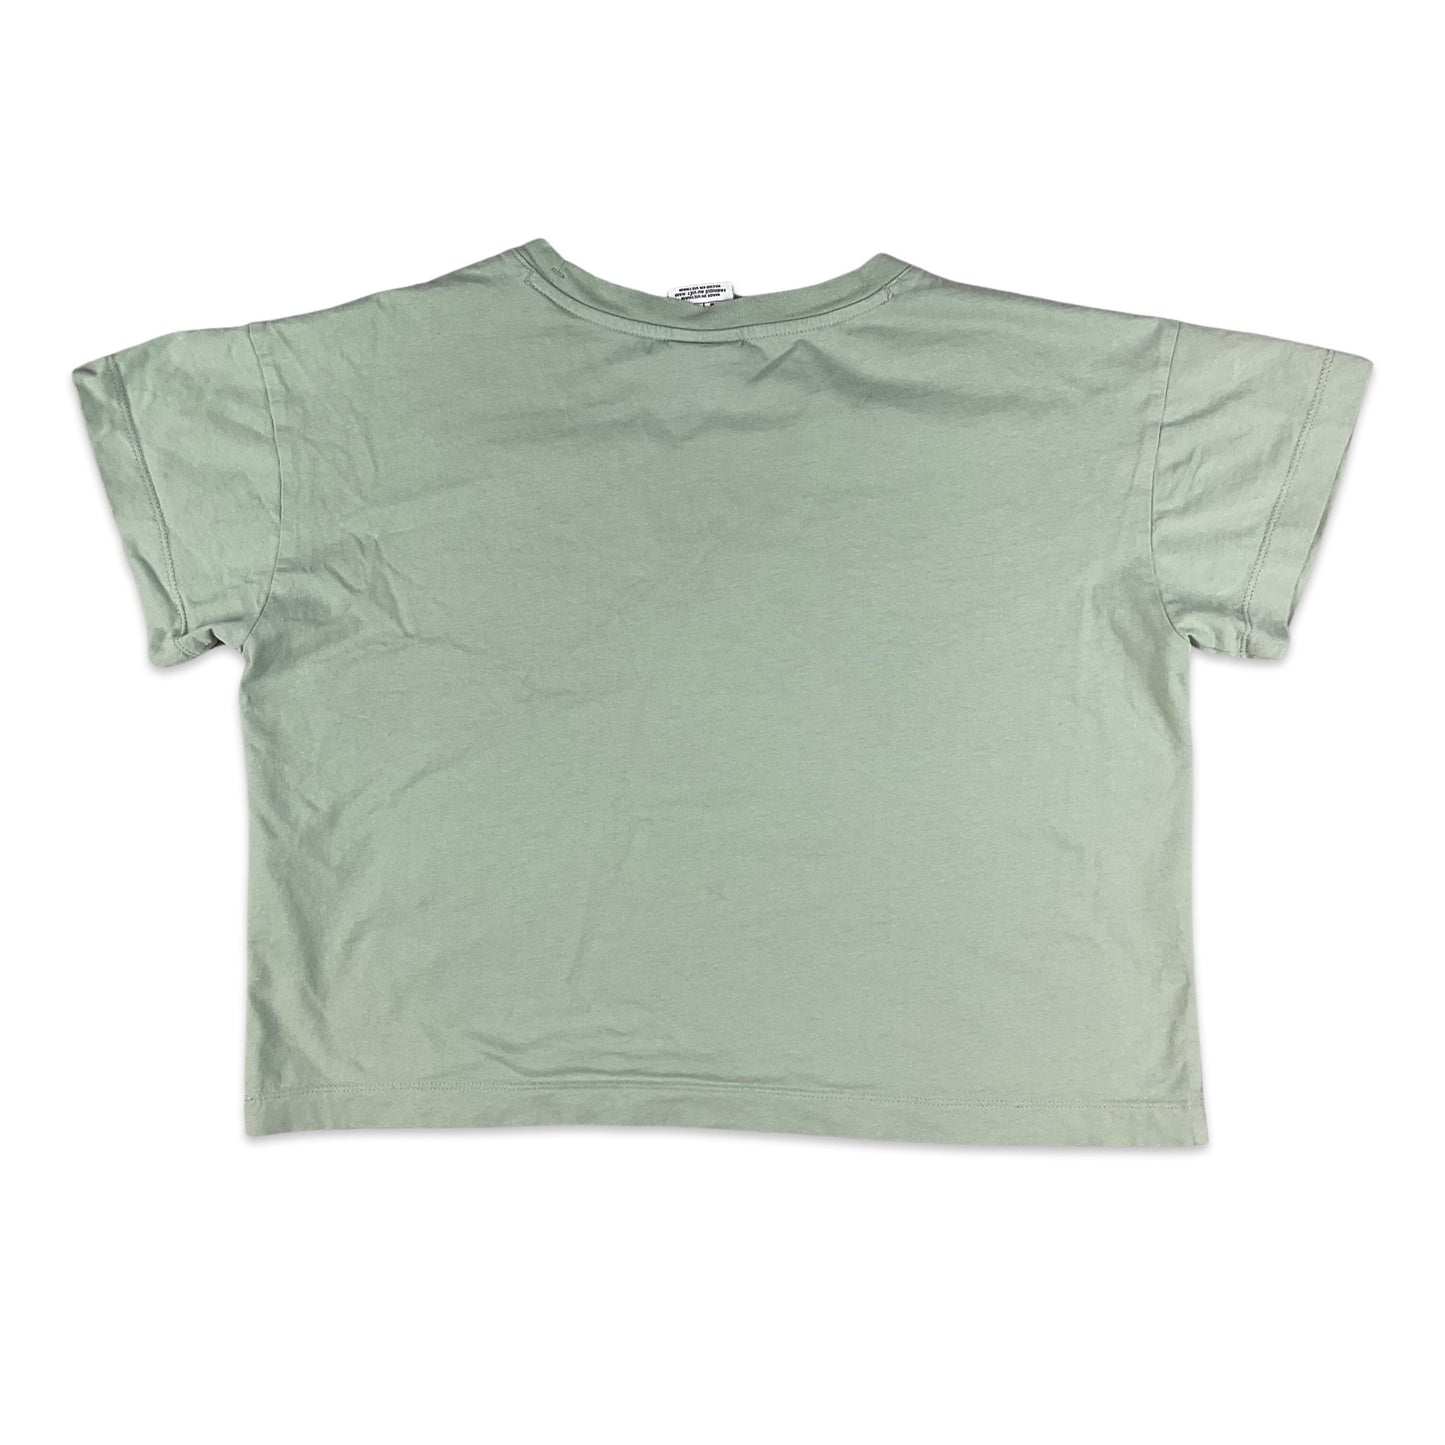 Champion Green Cropped Top 10 12